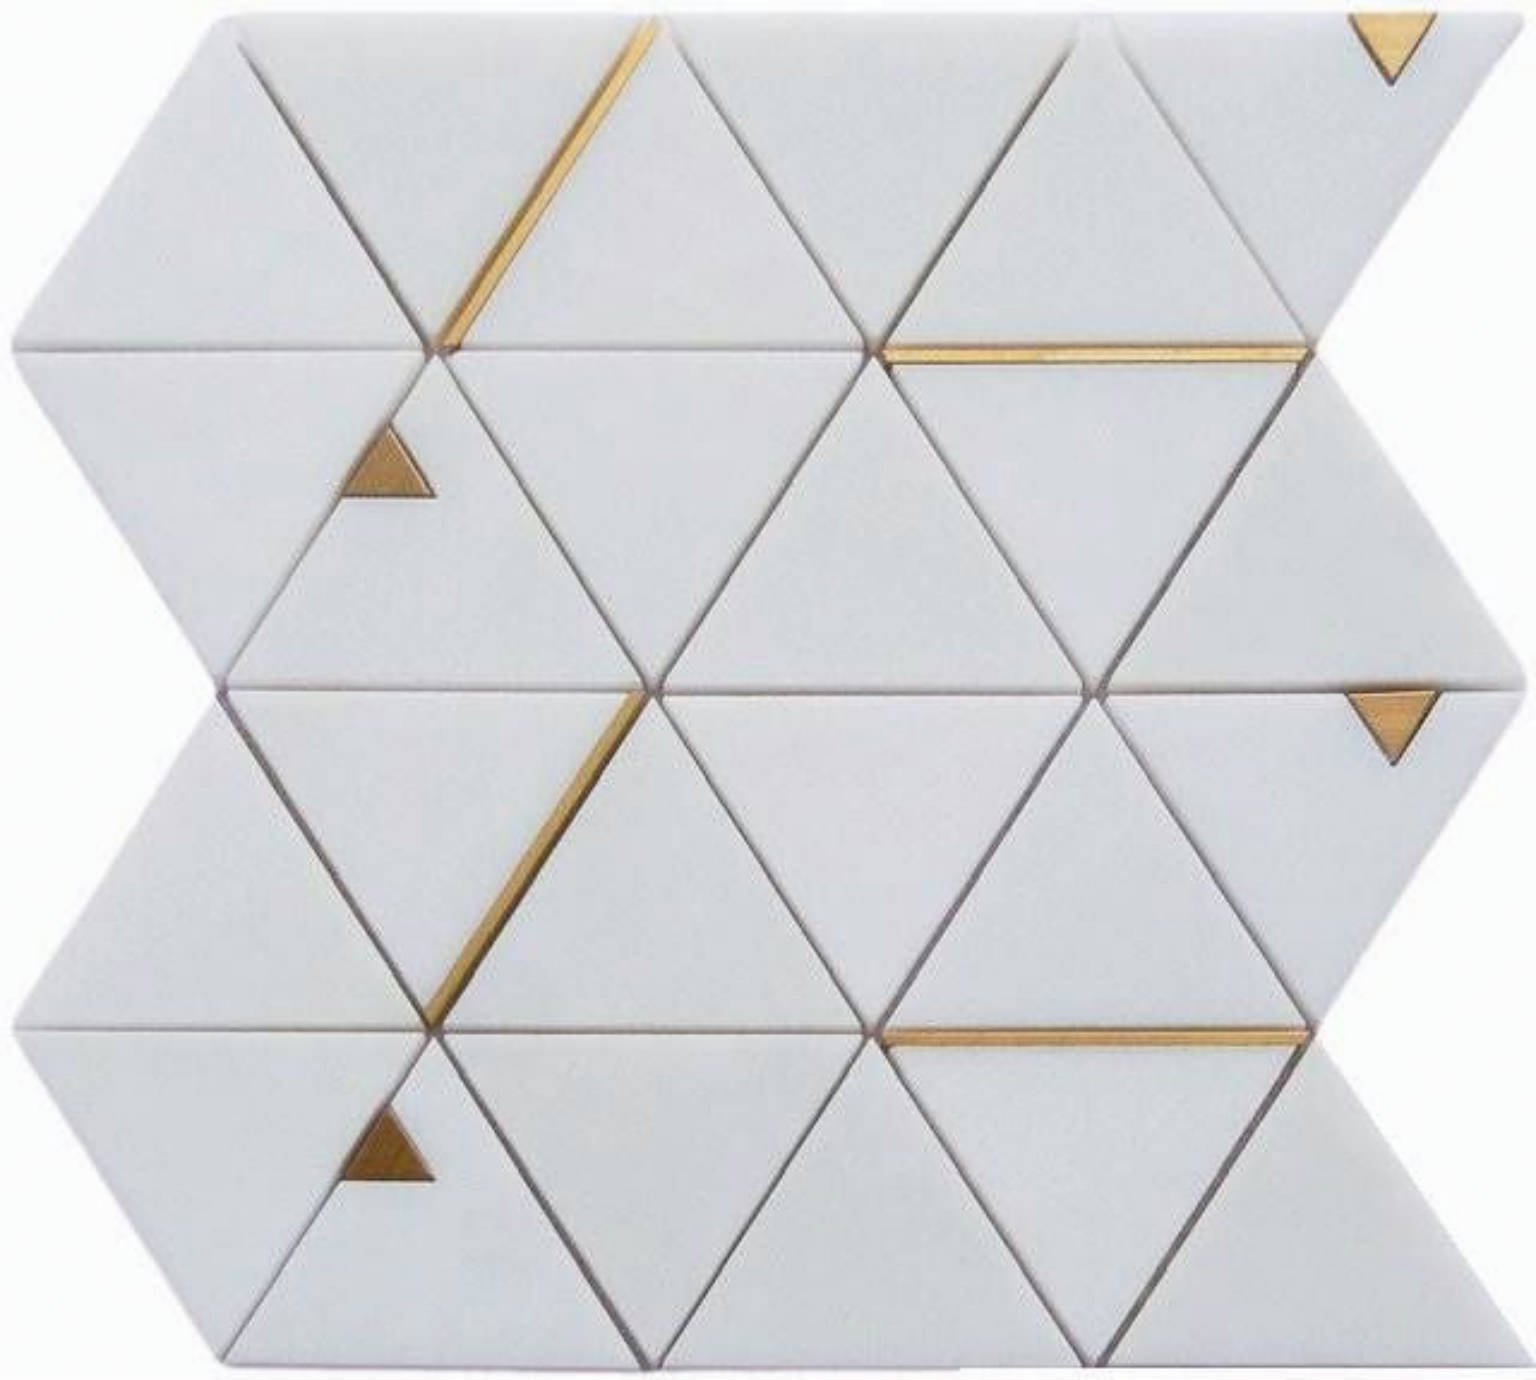 Titian | Stones & More | Finest selection of Mosaics, Glass, Tile and Stone